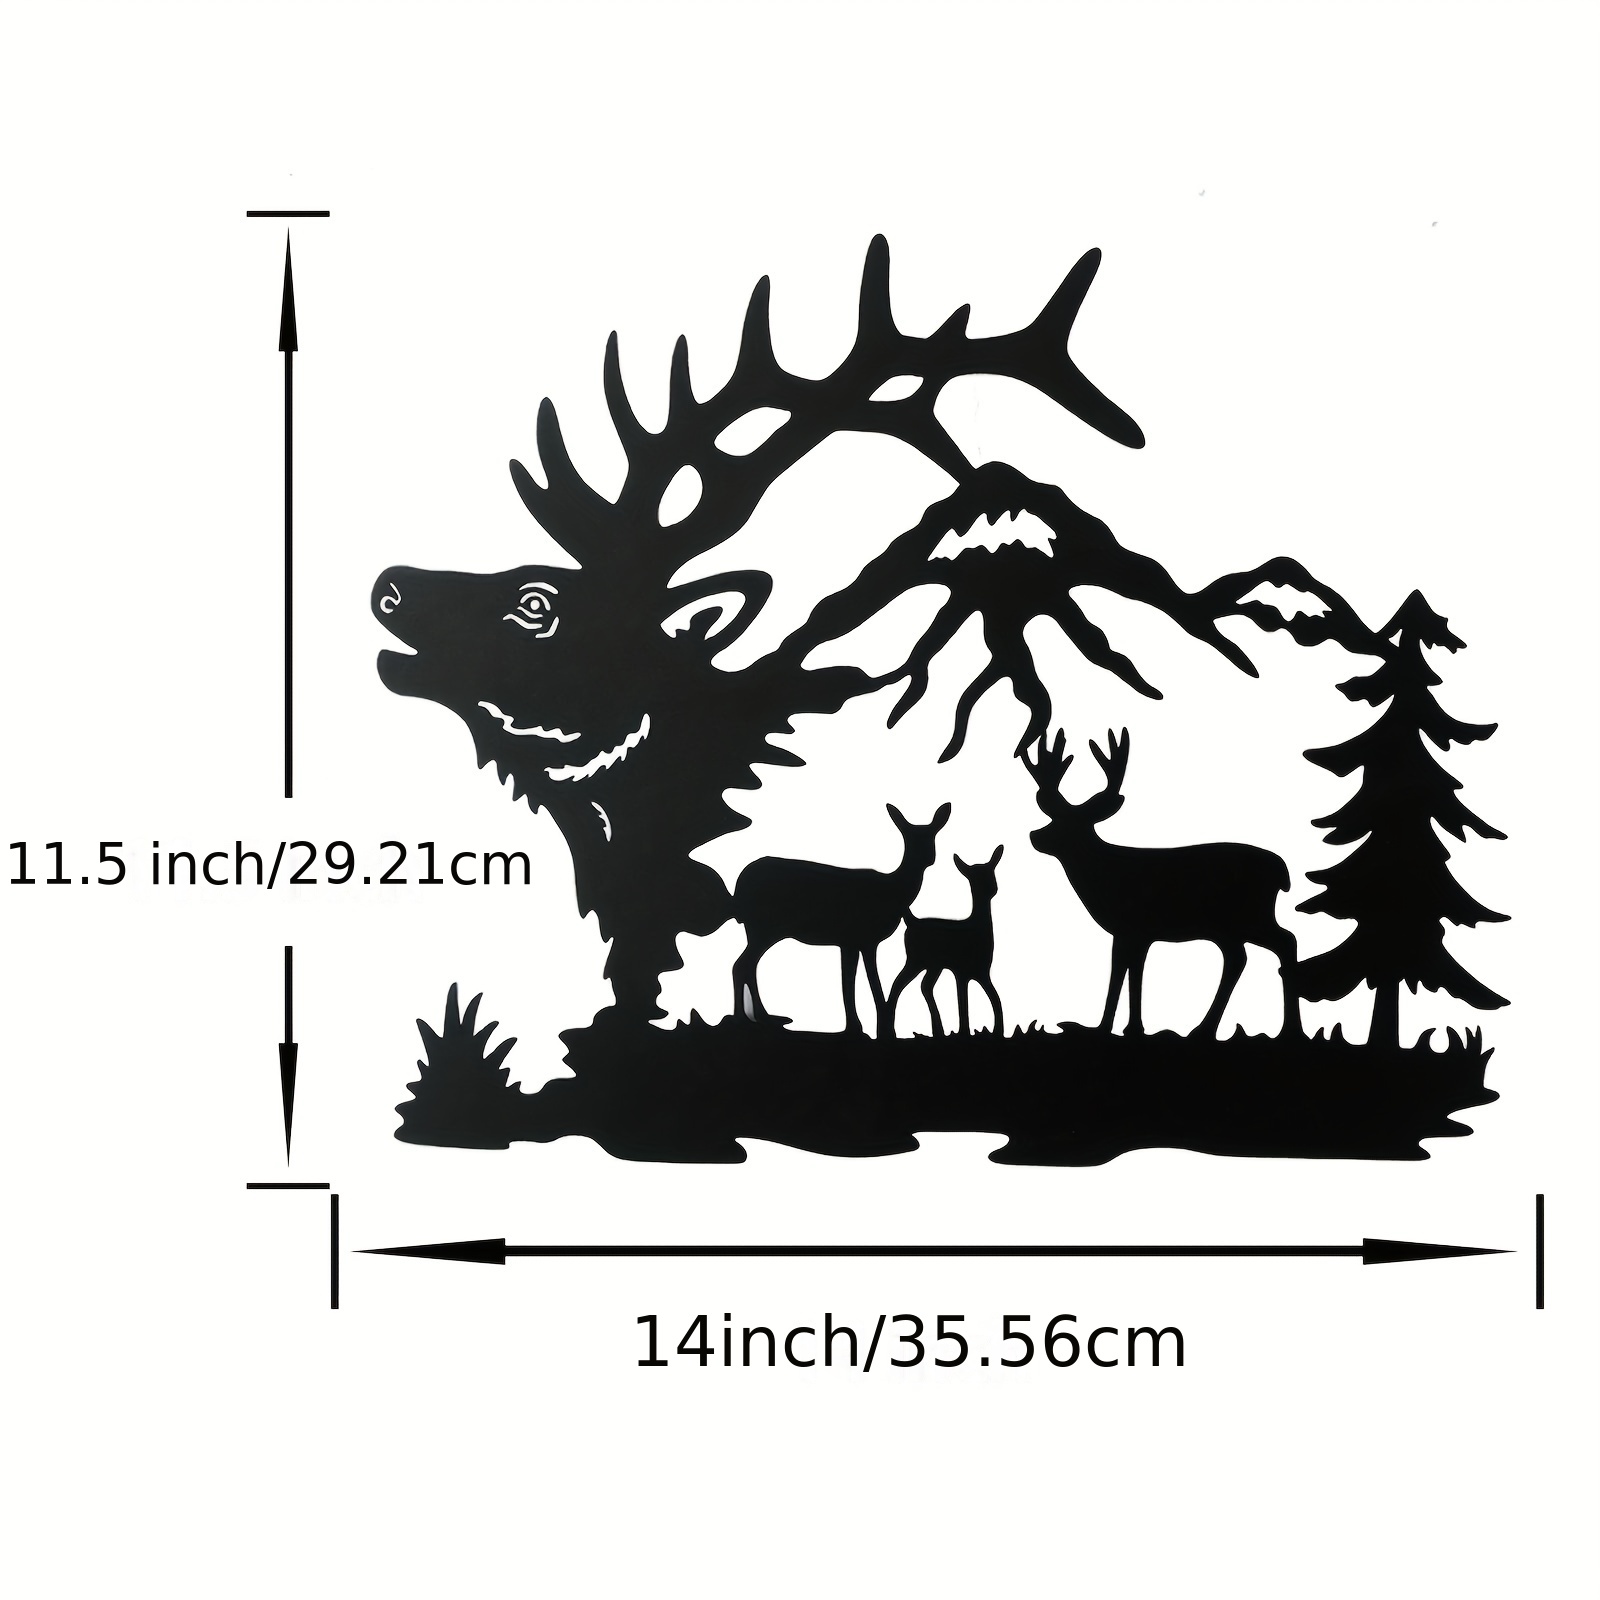 HomeRustique Real Wooden Cabin Decor with Bear, Deer and Moose (Set of 3) -  Woodland Rustic Wall Decoration for Home, Log Cabin, Hunting Theme